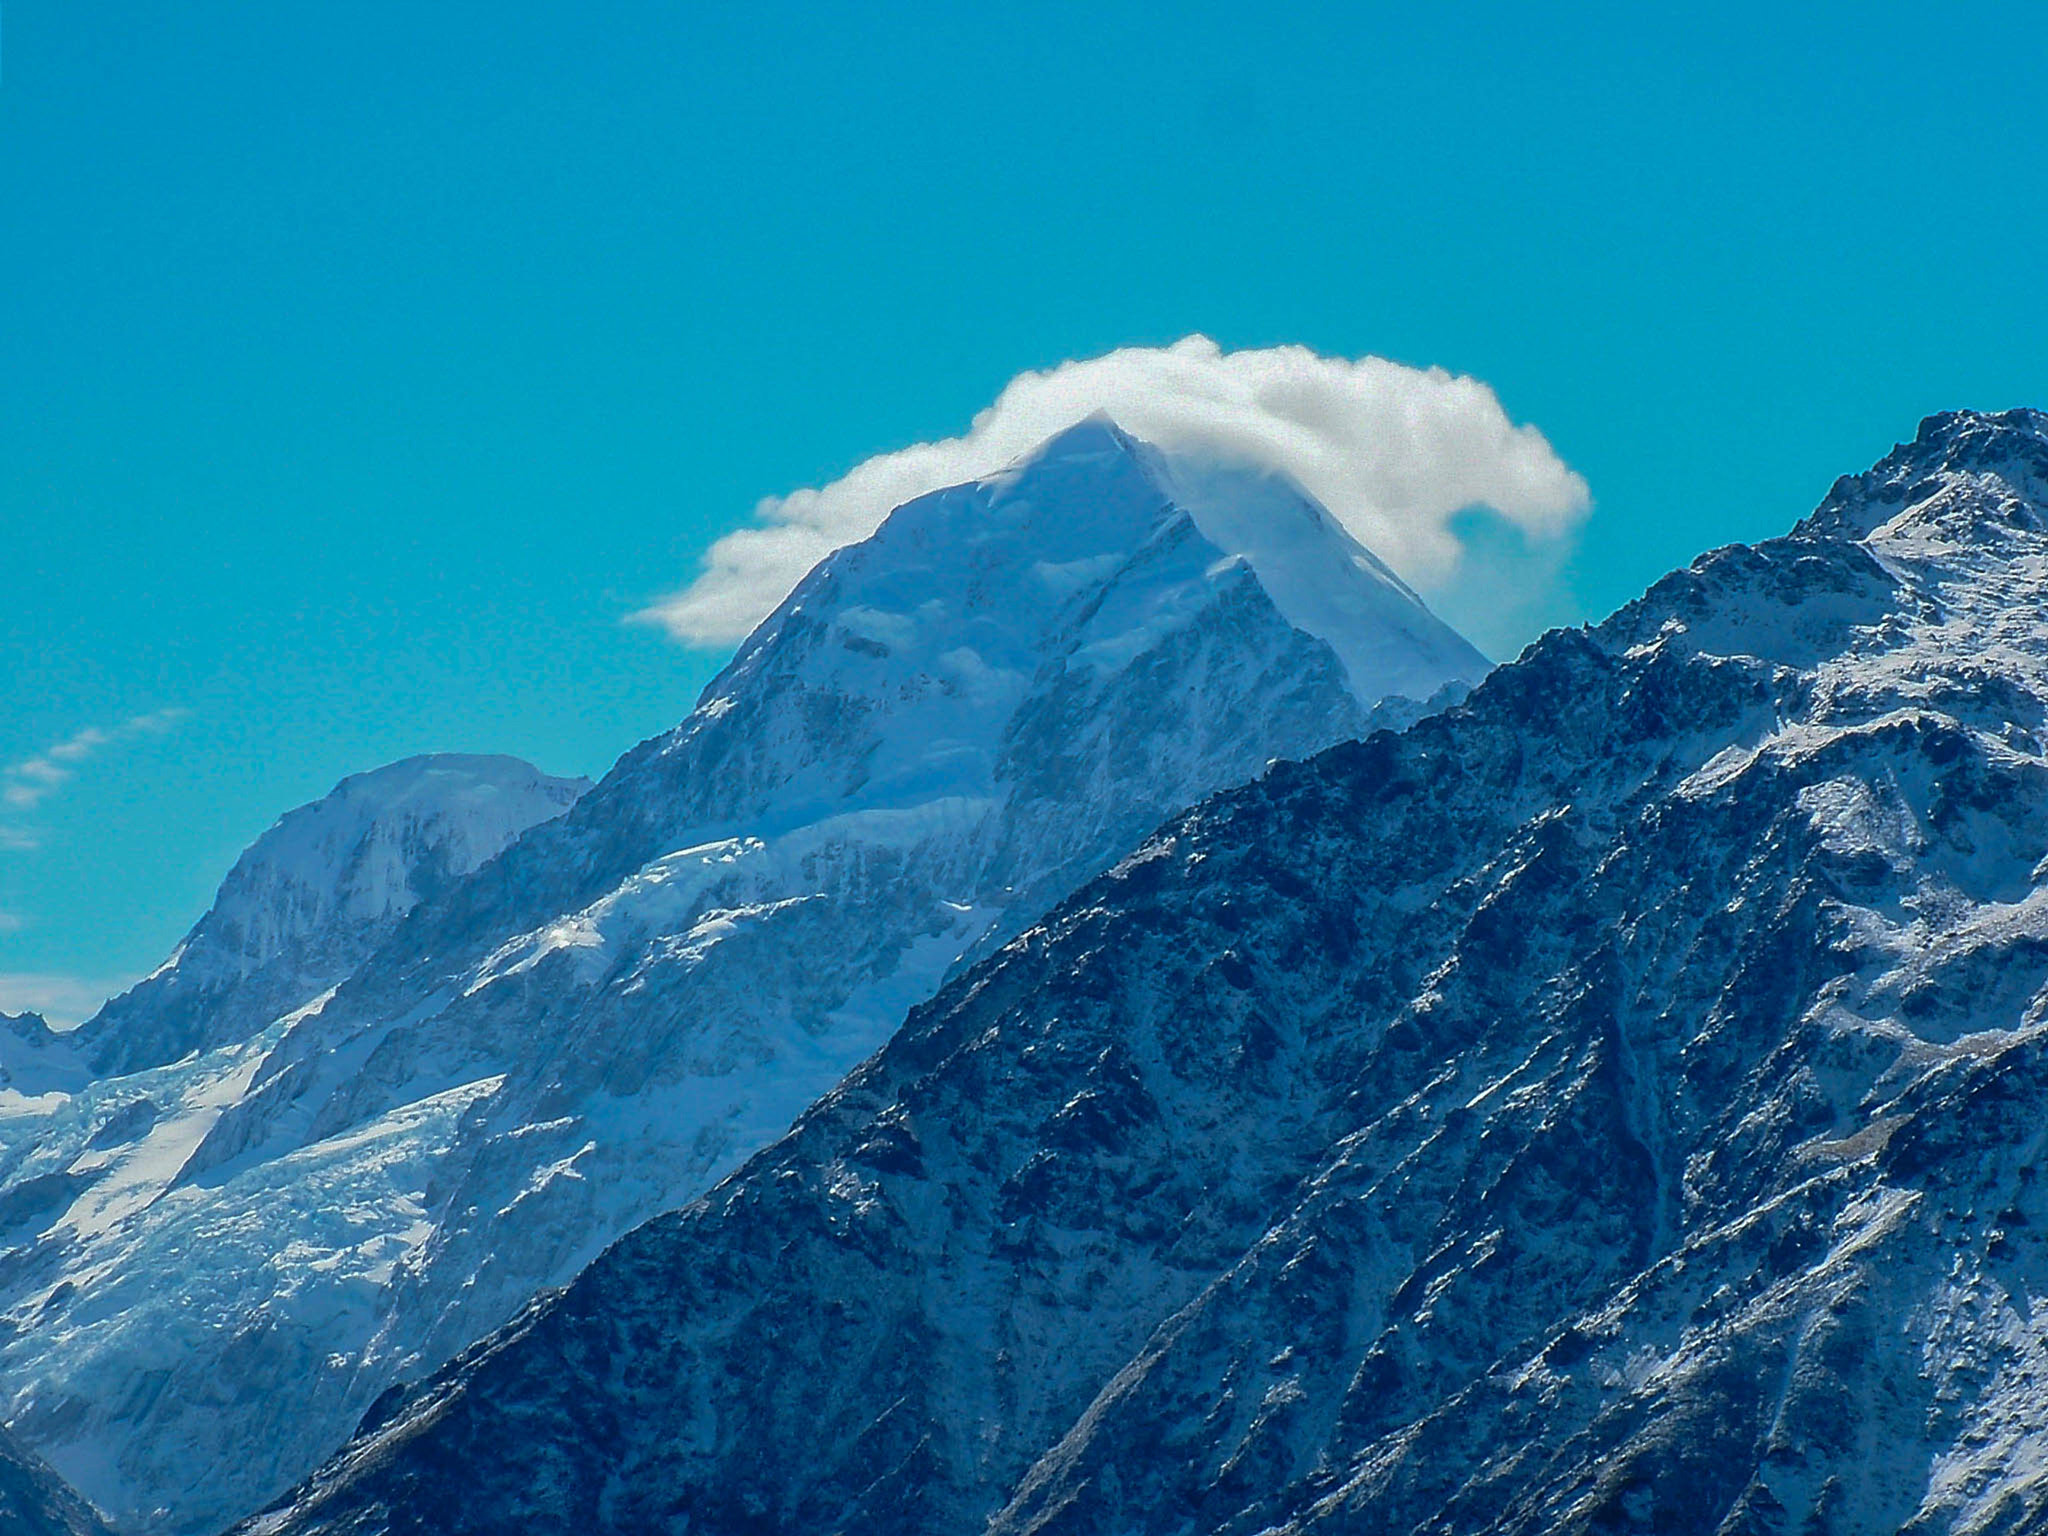 Fujifilm FinePix S20Pro sample photo. Mount cook with summit in cloud (of ) photography